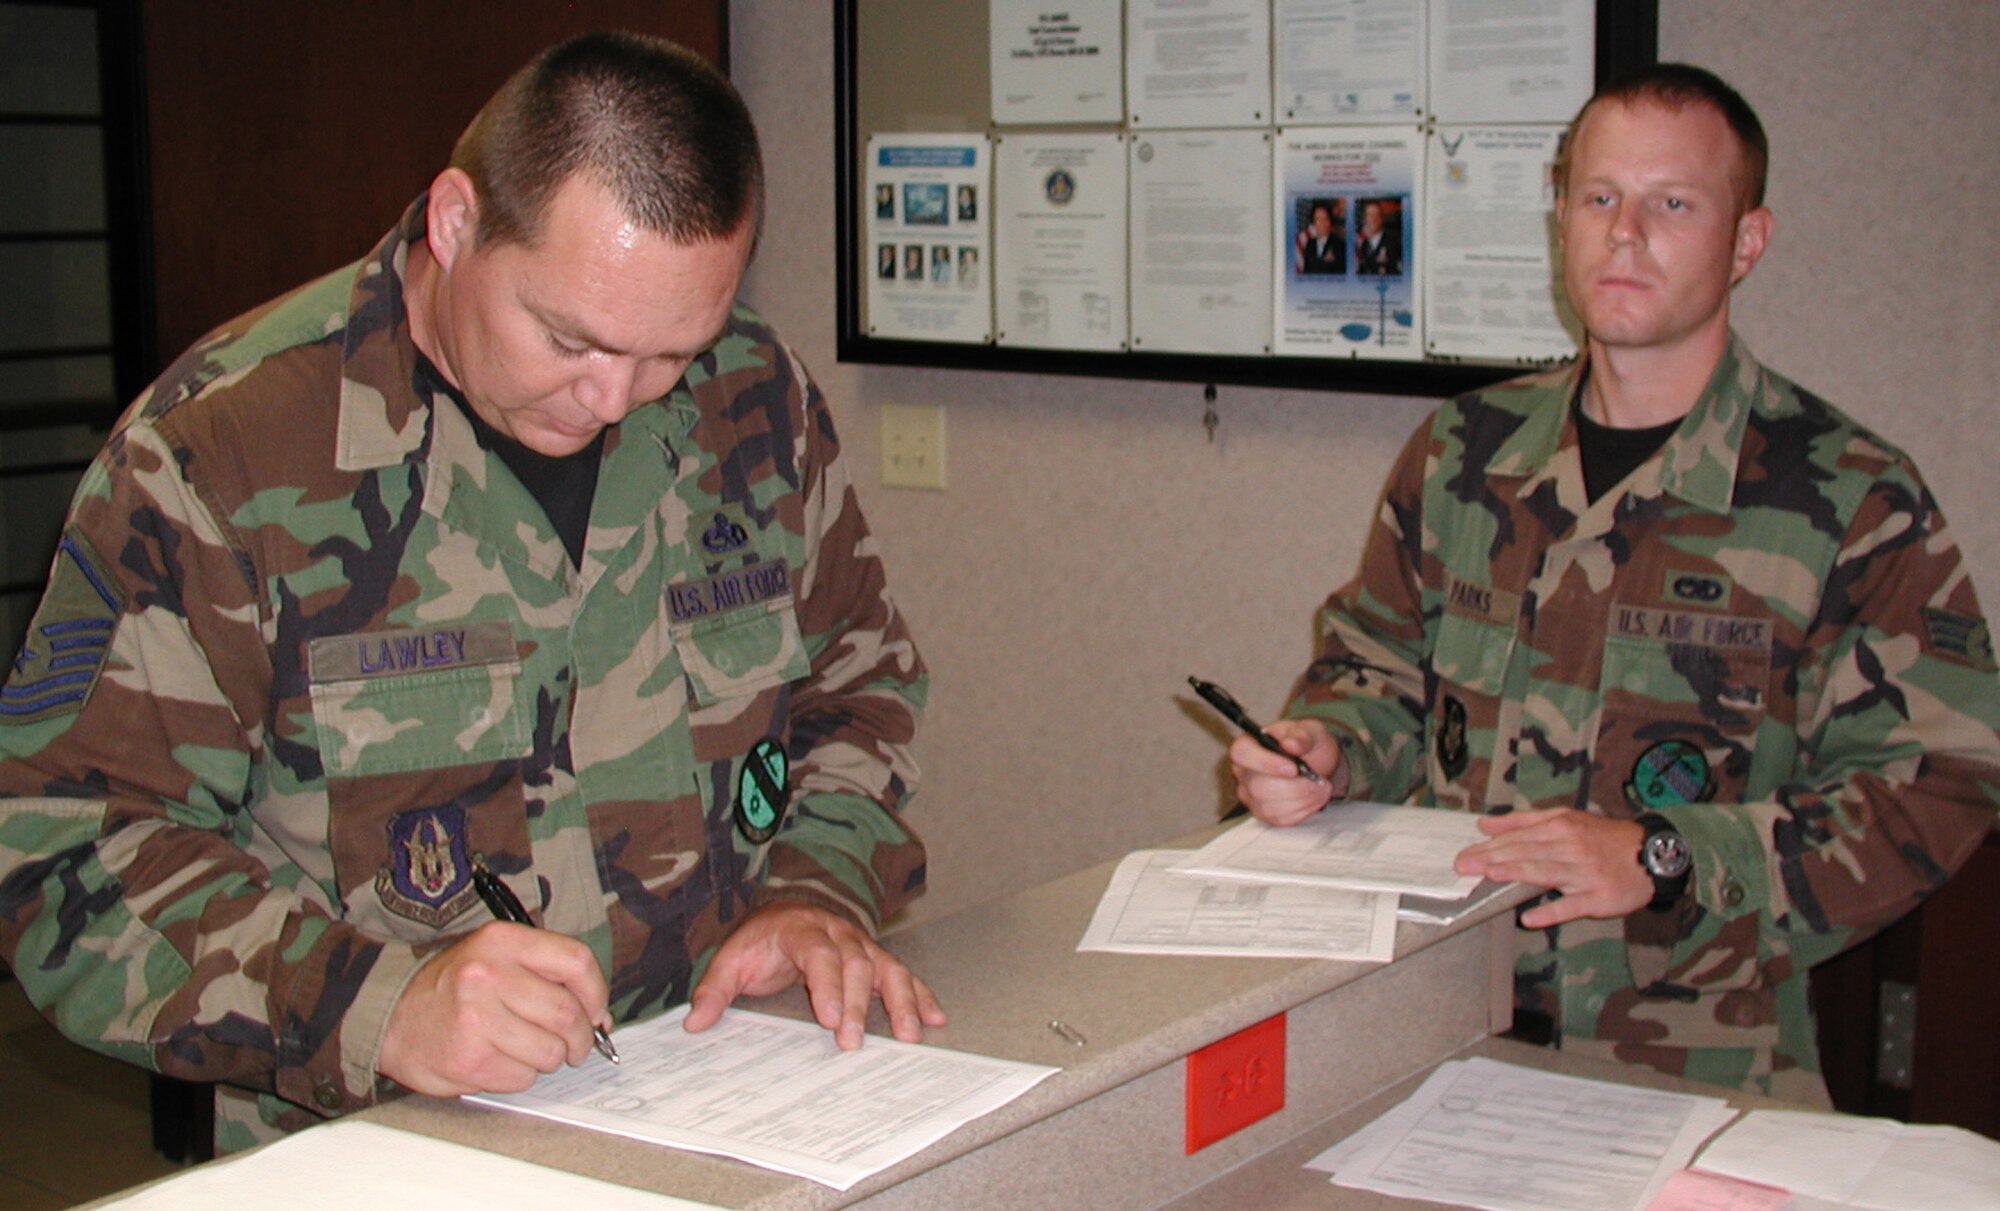 Master Sgt. Brian Lawley (left) and Senior Airman Neil Parks fill out paperwork after returning from a deployment to Turkey.  Sergeant Lawley is the jet section lead for the 931st Aircraft Maintenance Squadron and Airman Parks is an aircraft hydraulic systems journeyman for the squadron. (U.S. Air Force photo/Tech. Sgt. Ed Cropper)